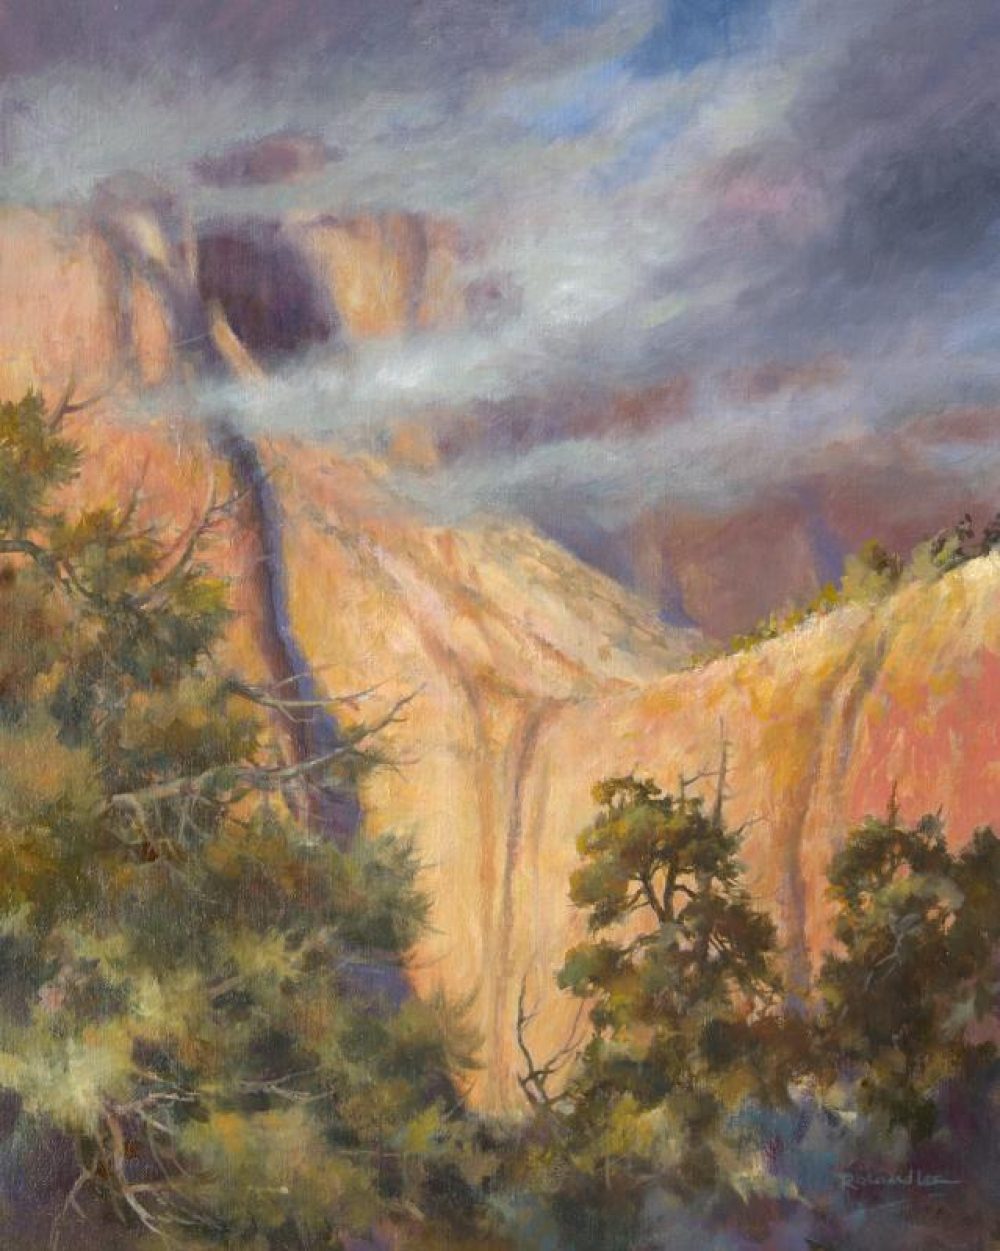 Mists of Zion - Oil Painting of Zion National Park